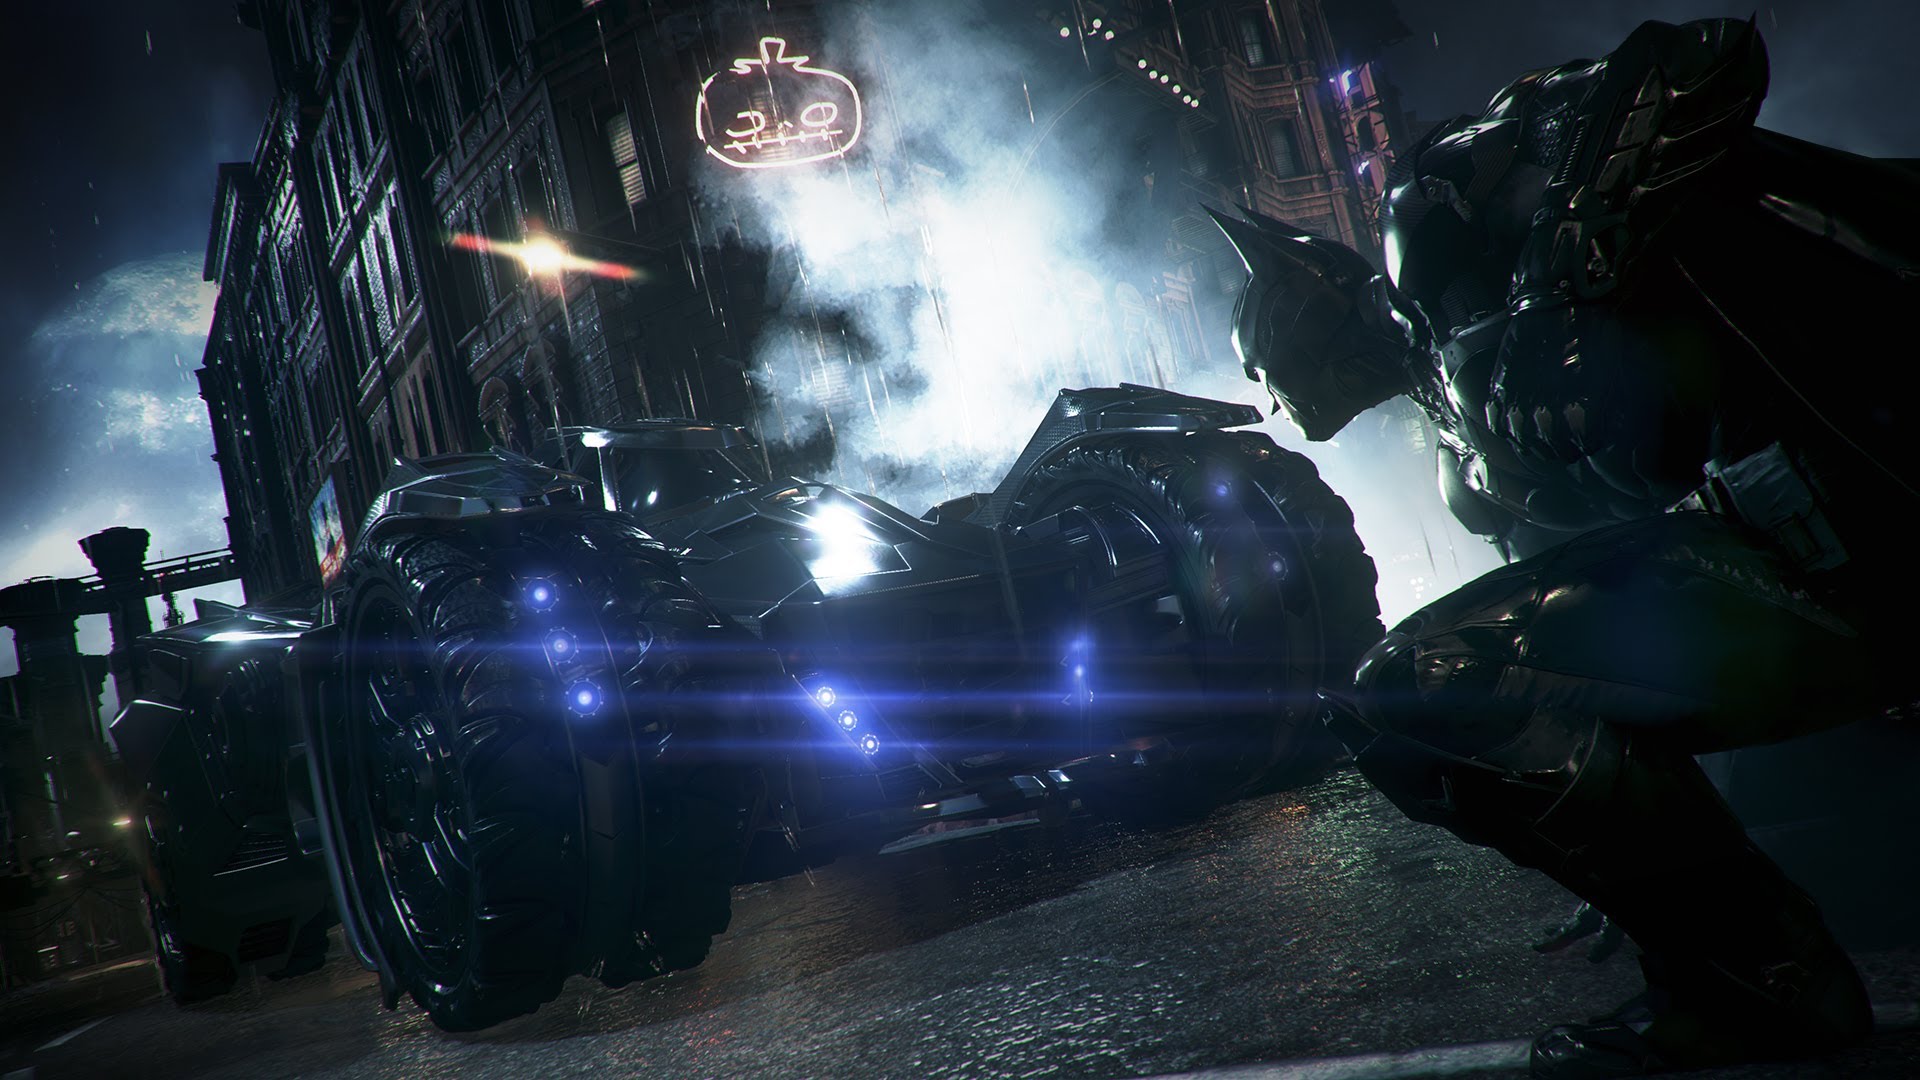 Video For Batman: Arkham Knight Puts Fear into Your Enemies